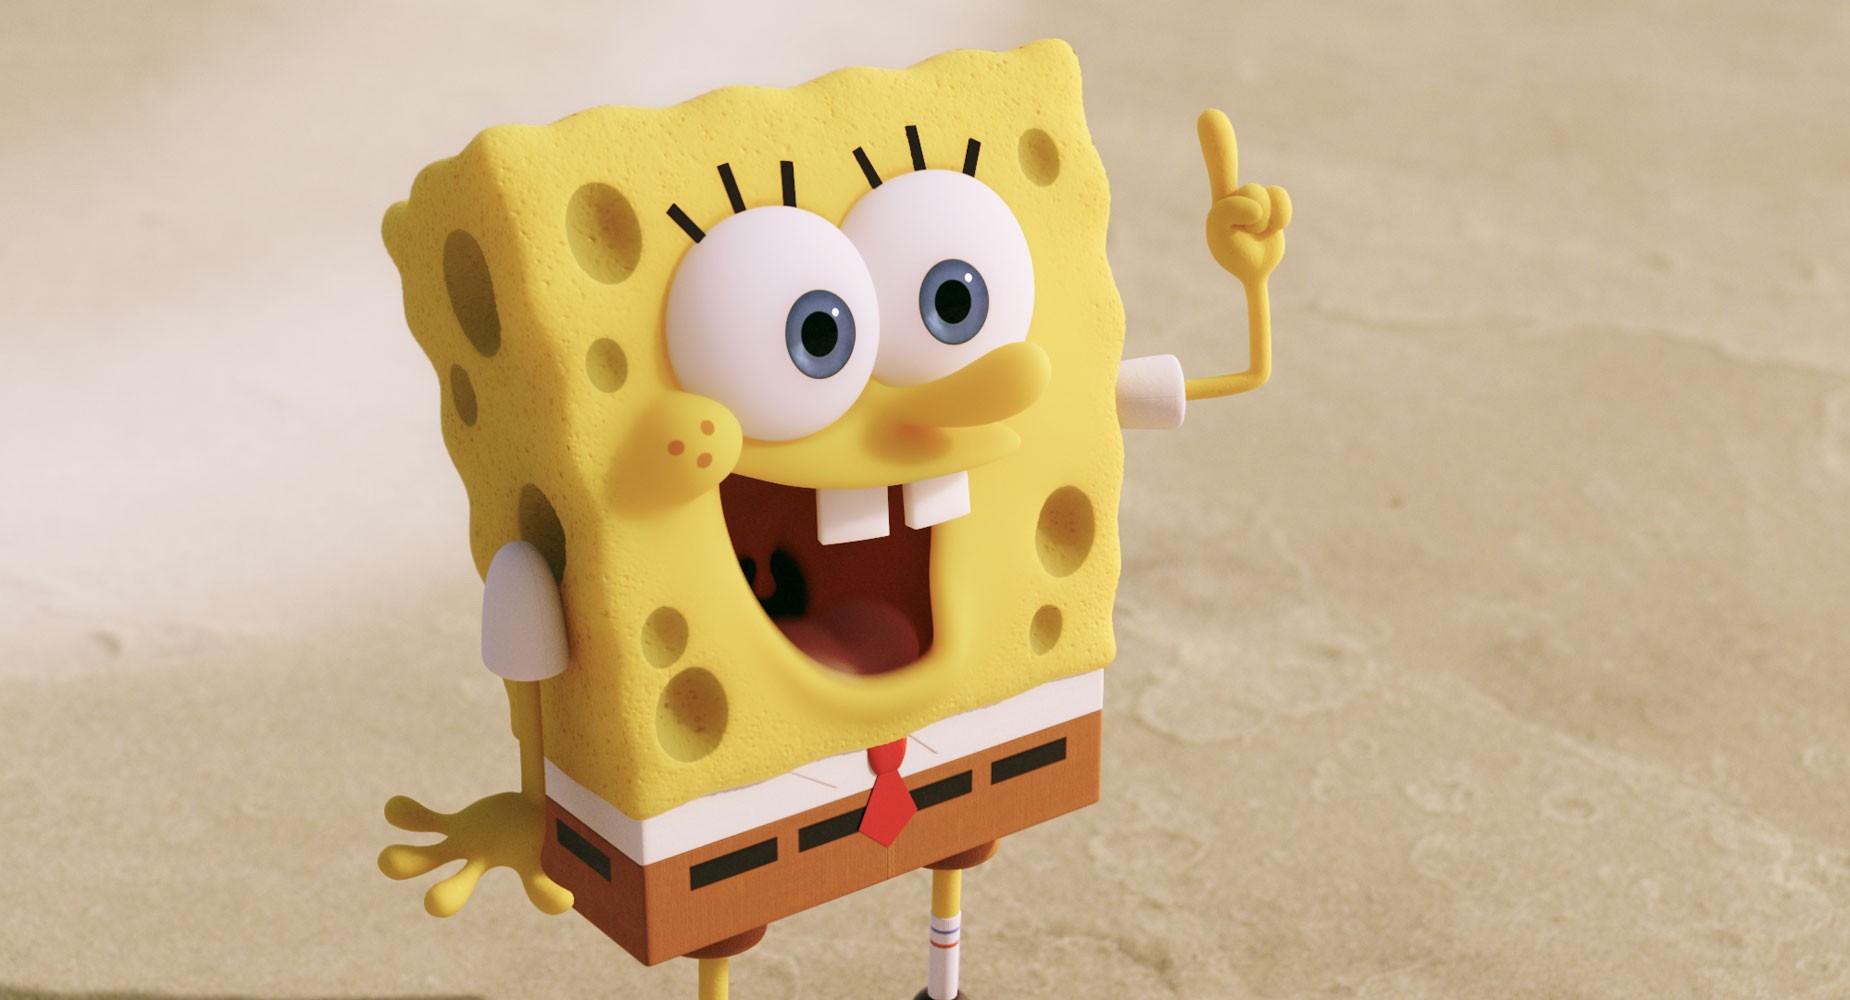 SpongeBob SquarePants from Paramount Pictures' The SpongeBob Movie: Sponge Out of Water (2015)